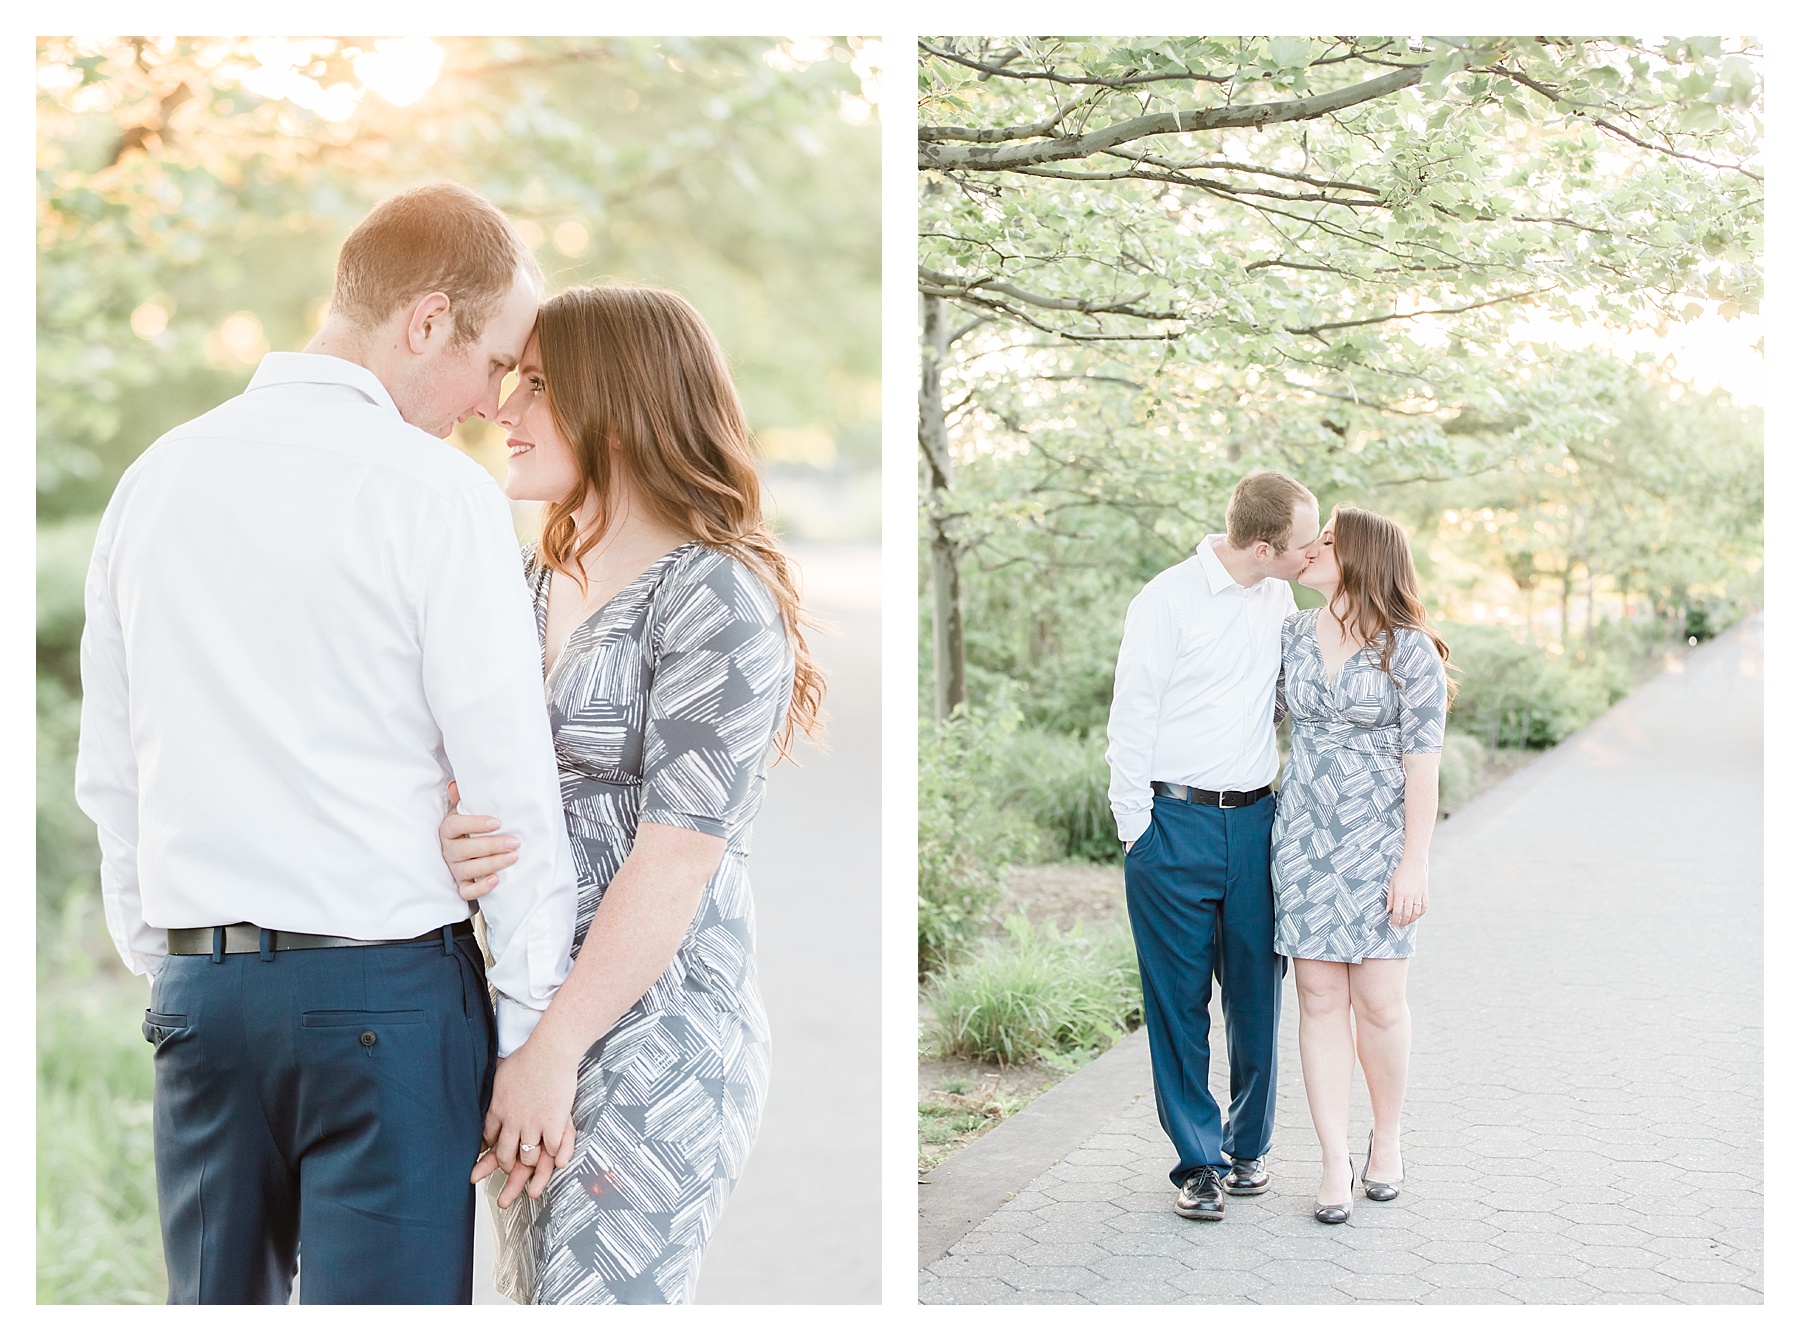 Candice Adelle Photography DC Wedding Photographer DC Georgetown Engagement_1577.jpg